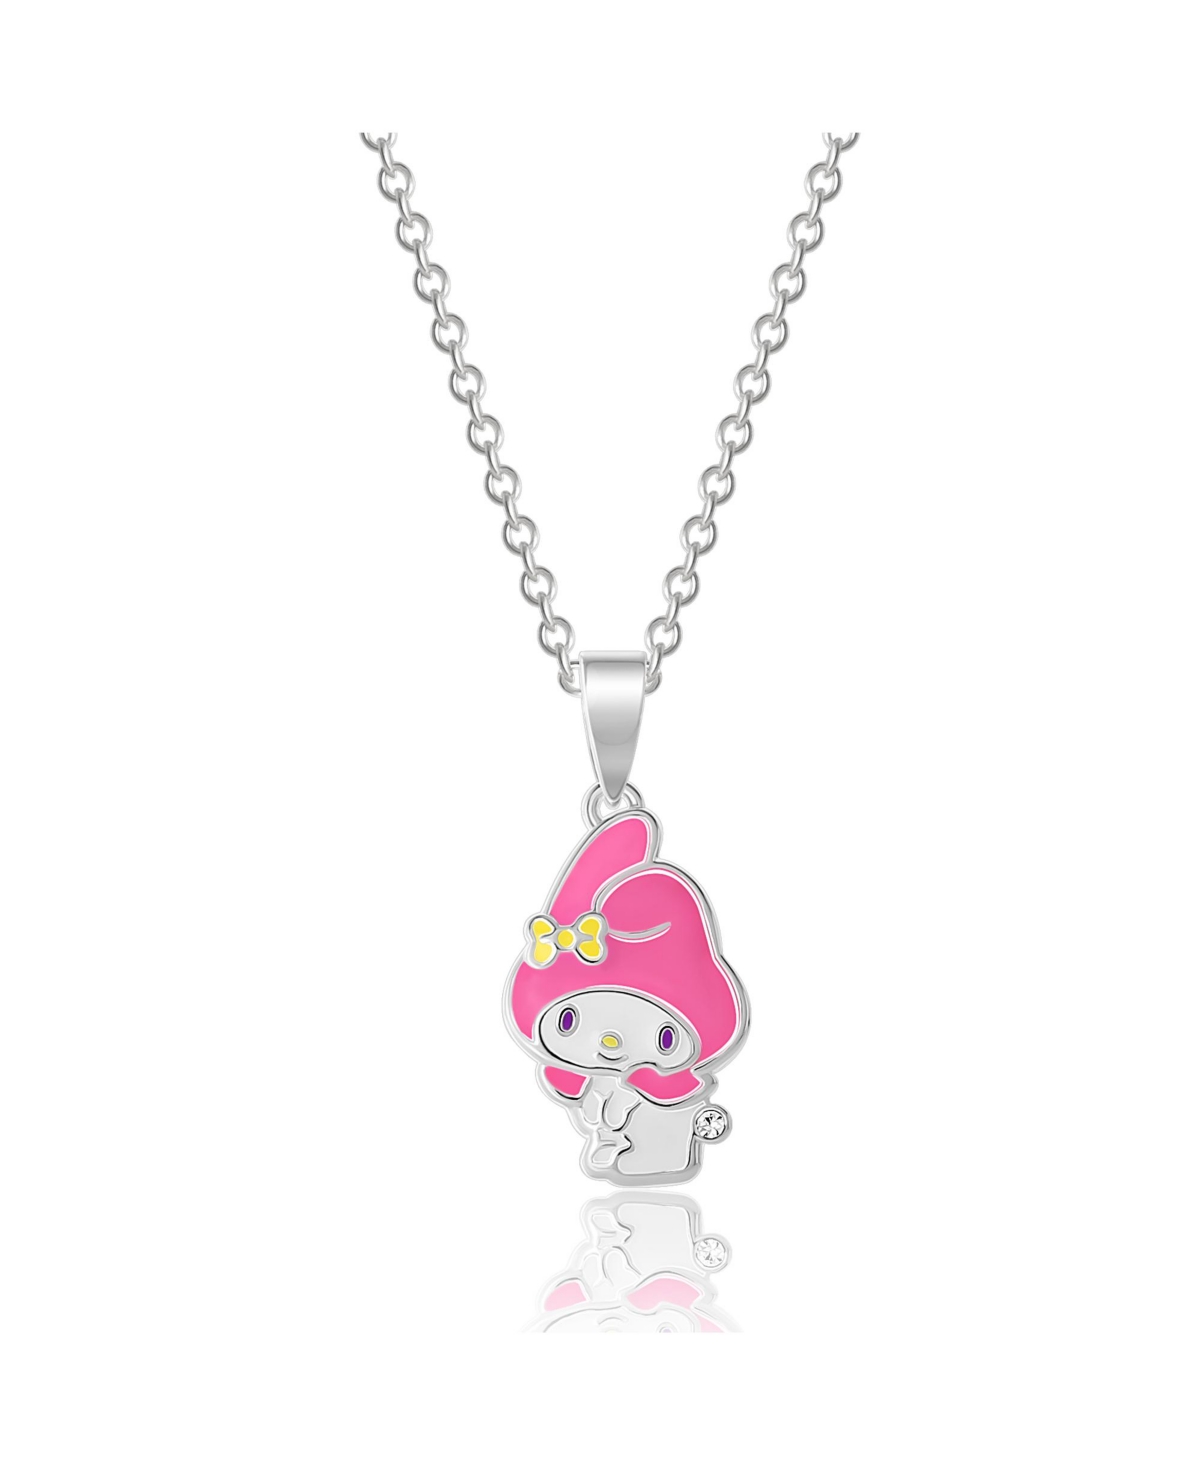 Sanrio Silver Plated and Clear Crystal My Melody Pendant - 18'' Chain, Officially Licensed Authentic - Pink